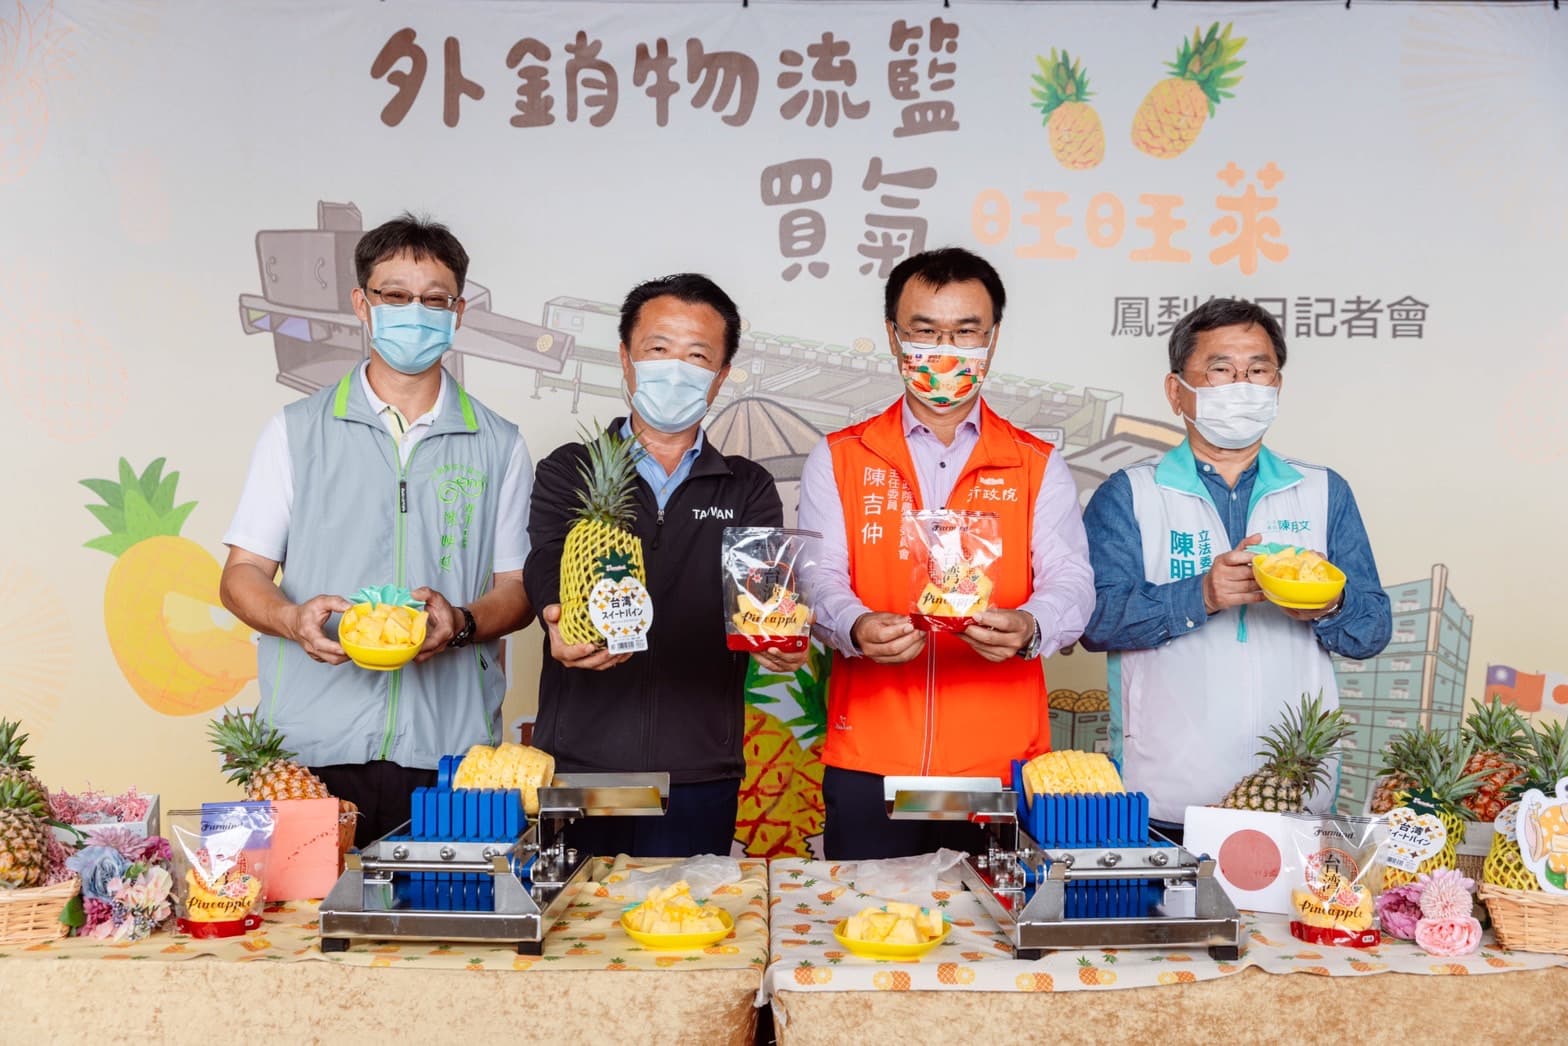 At a press conference on exports of pineapples to Japan, Council of Agriculture Minister Chen Chi-chung (second from right), Chiayi County Magistrate Weng Chang-liang (second from left), legislator Chen Ming-wen (at right), and Chairman Chen Ying-yen (at left) demonstrate a pineapple cutting machine as part of the promotion of high-quality pineapples from Taiwan.